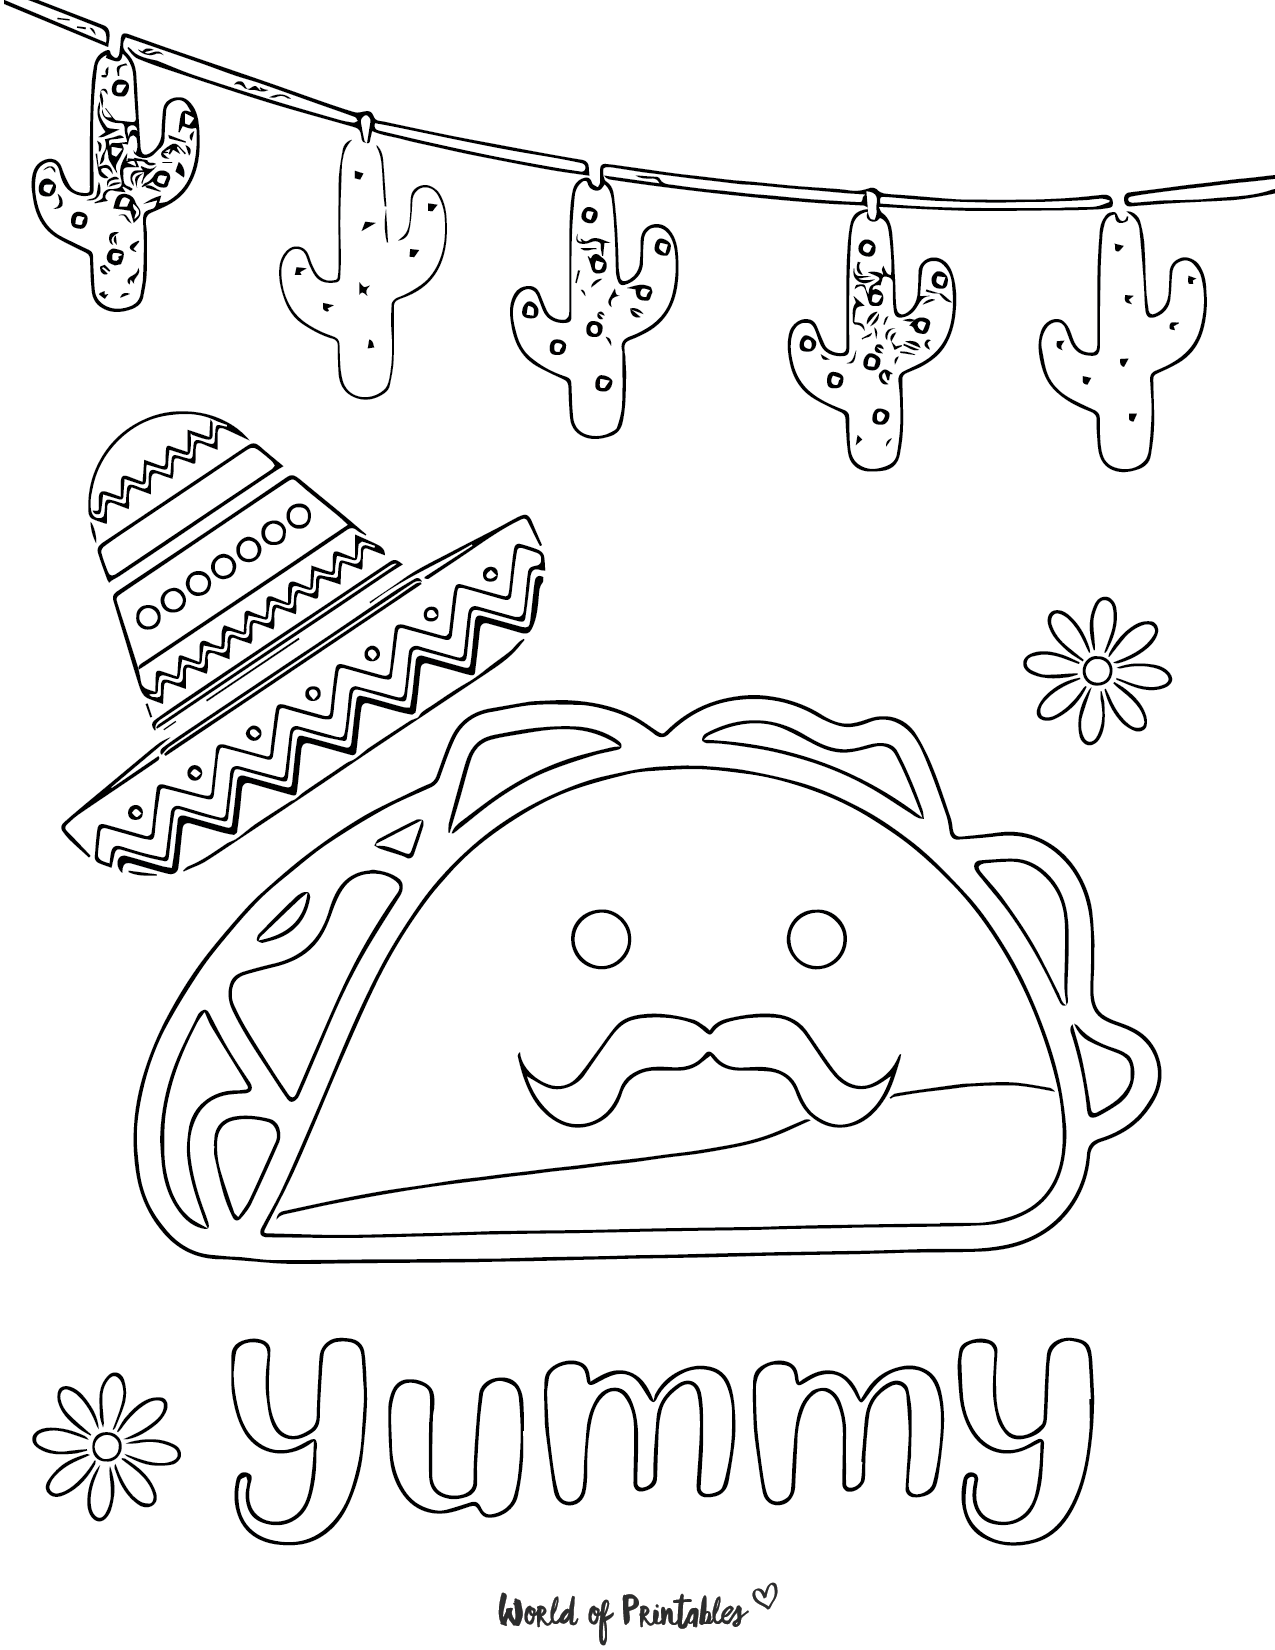 Cute Food Coloring Pages - World of Printables